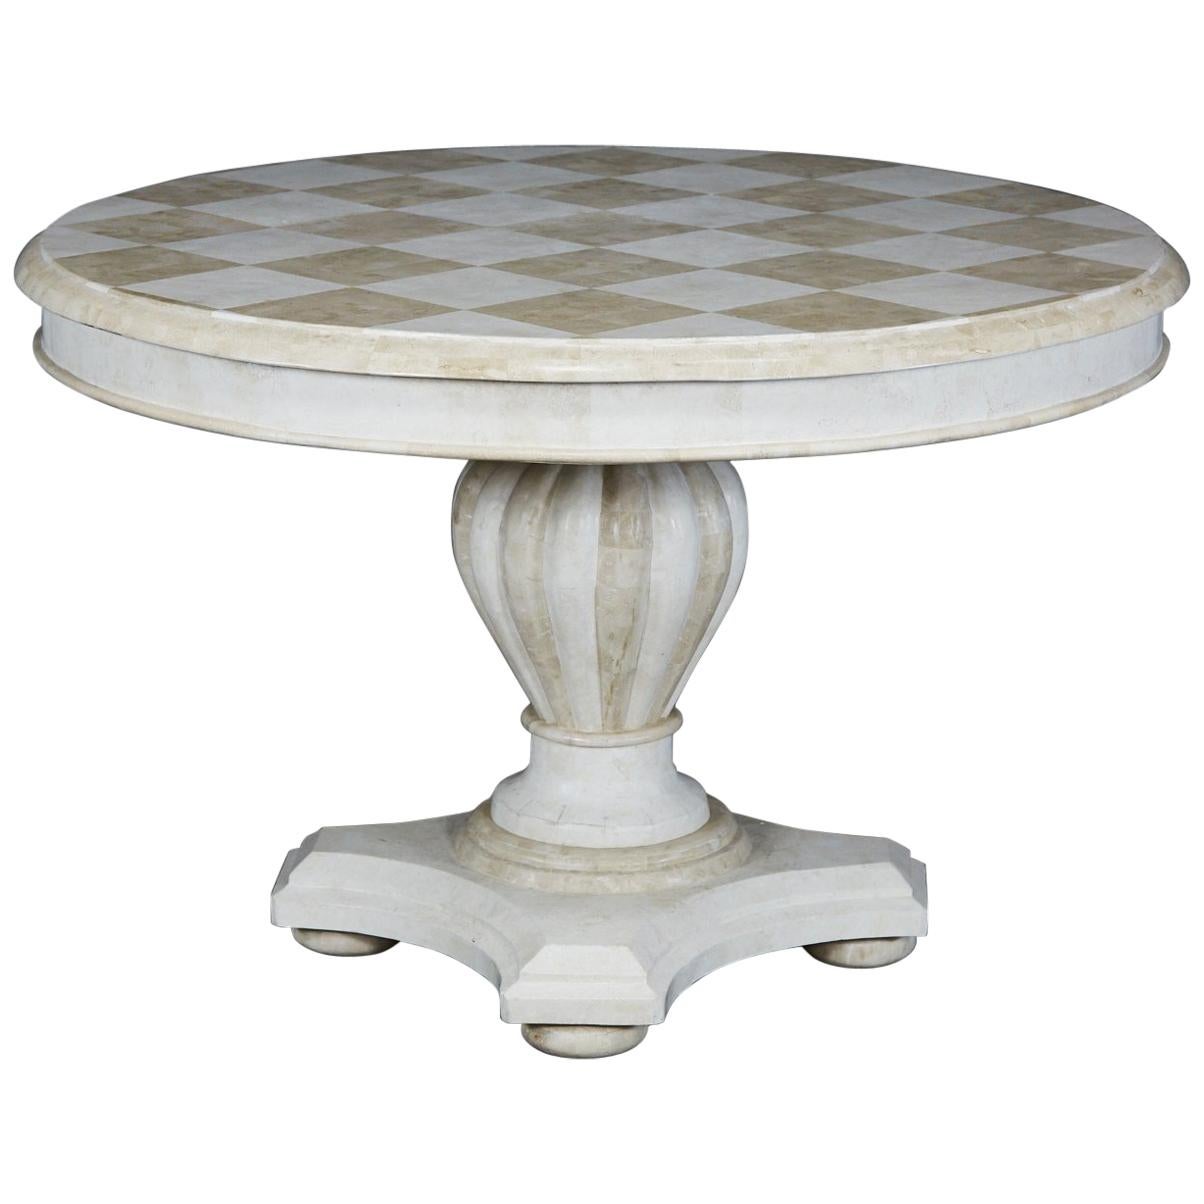 Round Pedestal Base Tessellated Stone Dining Table with Checkered Top, 1990s For Sale